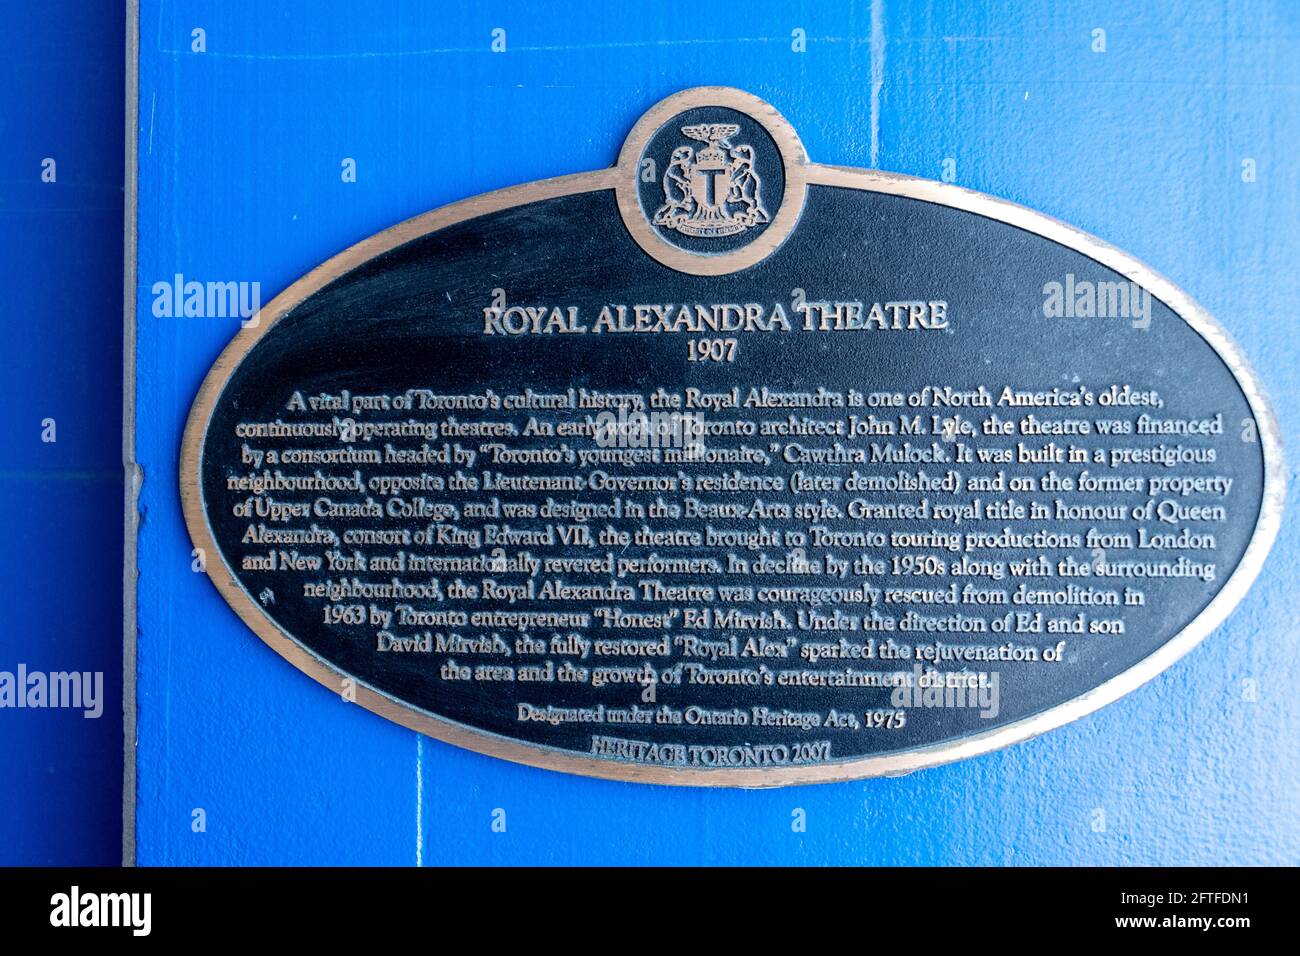 The Royal Alexandra Theatre exterior view. The building has the Ontario Heritage designation. It is a famous tourist attraction in Toronto, Canada Stock Photo